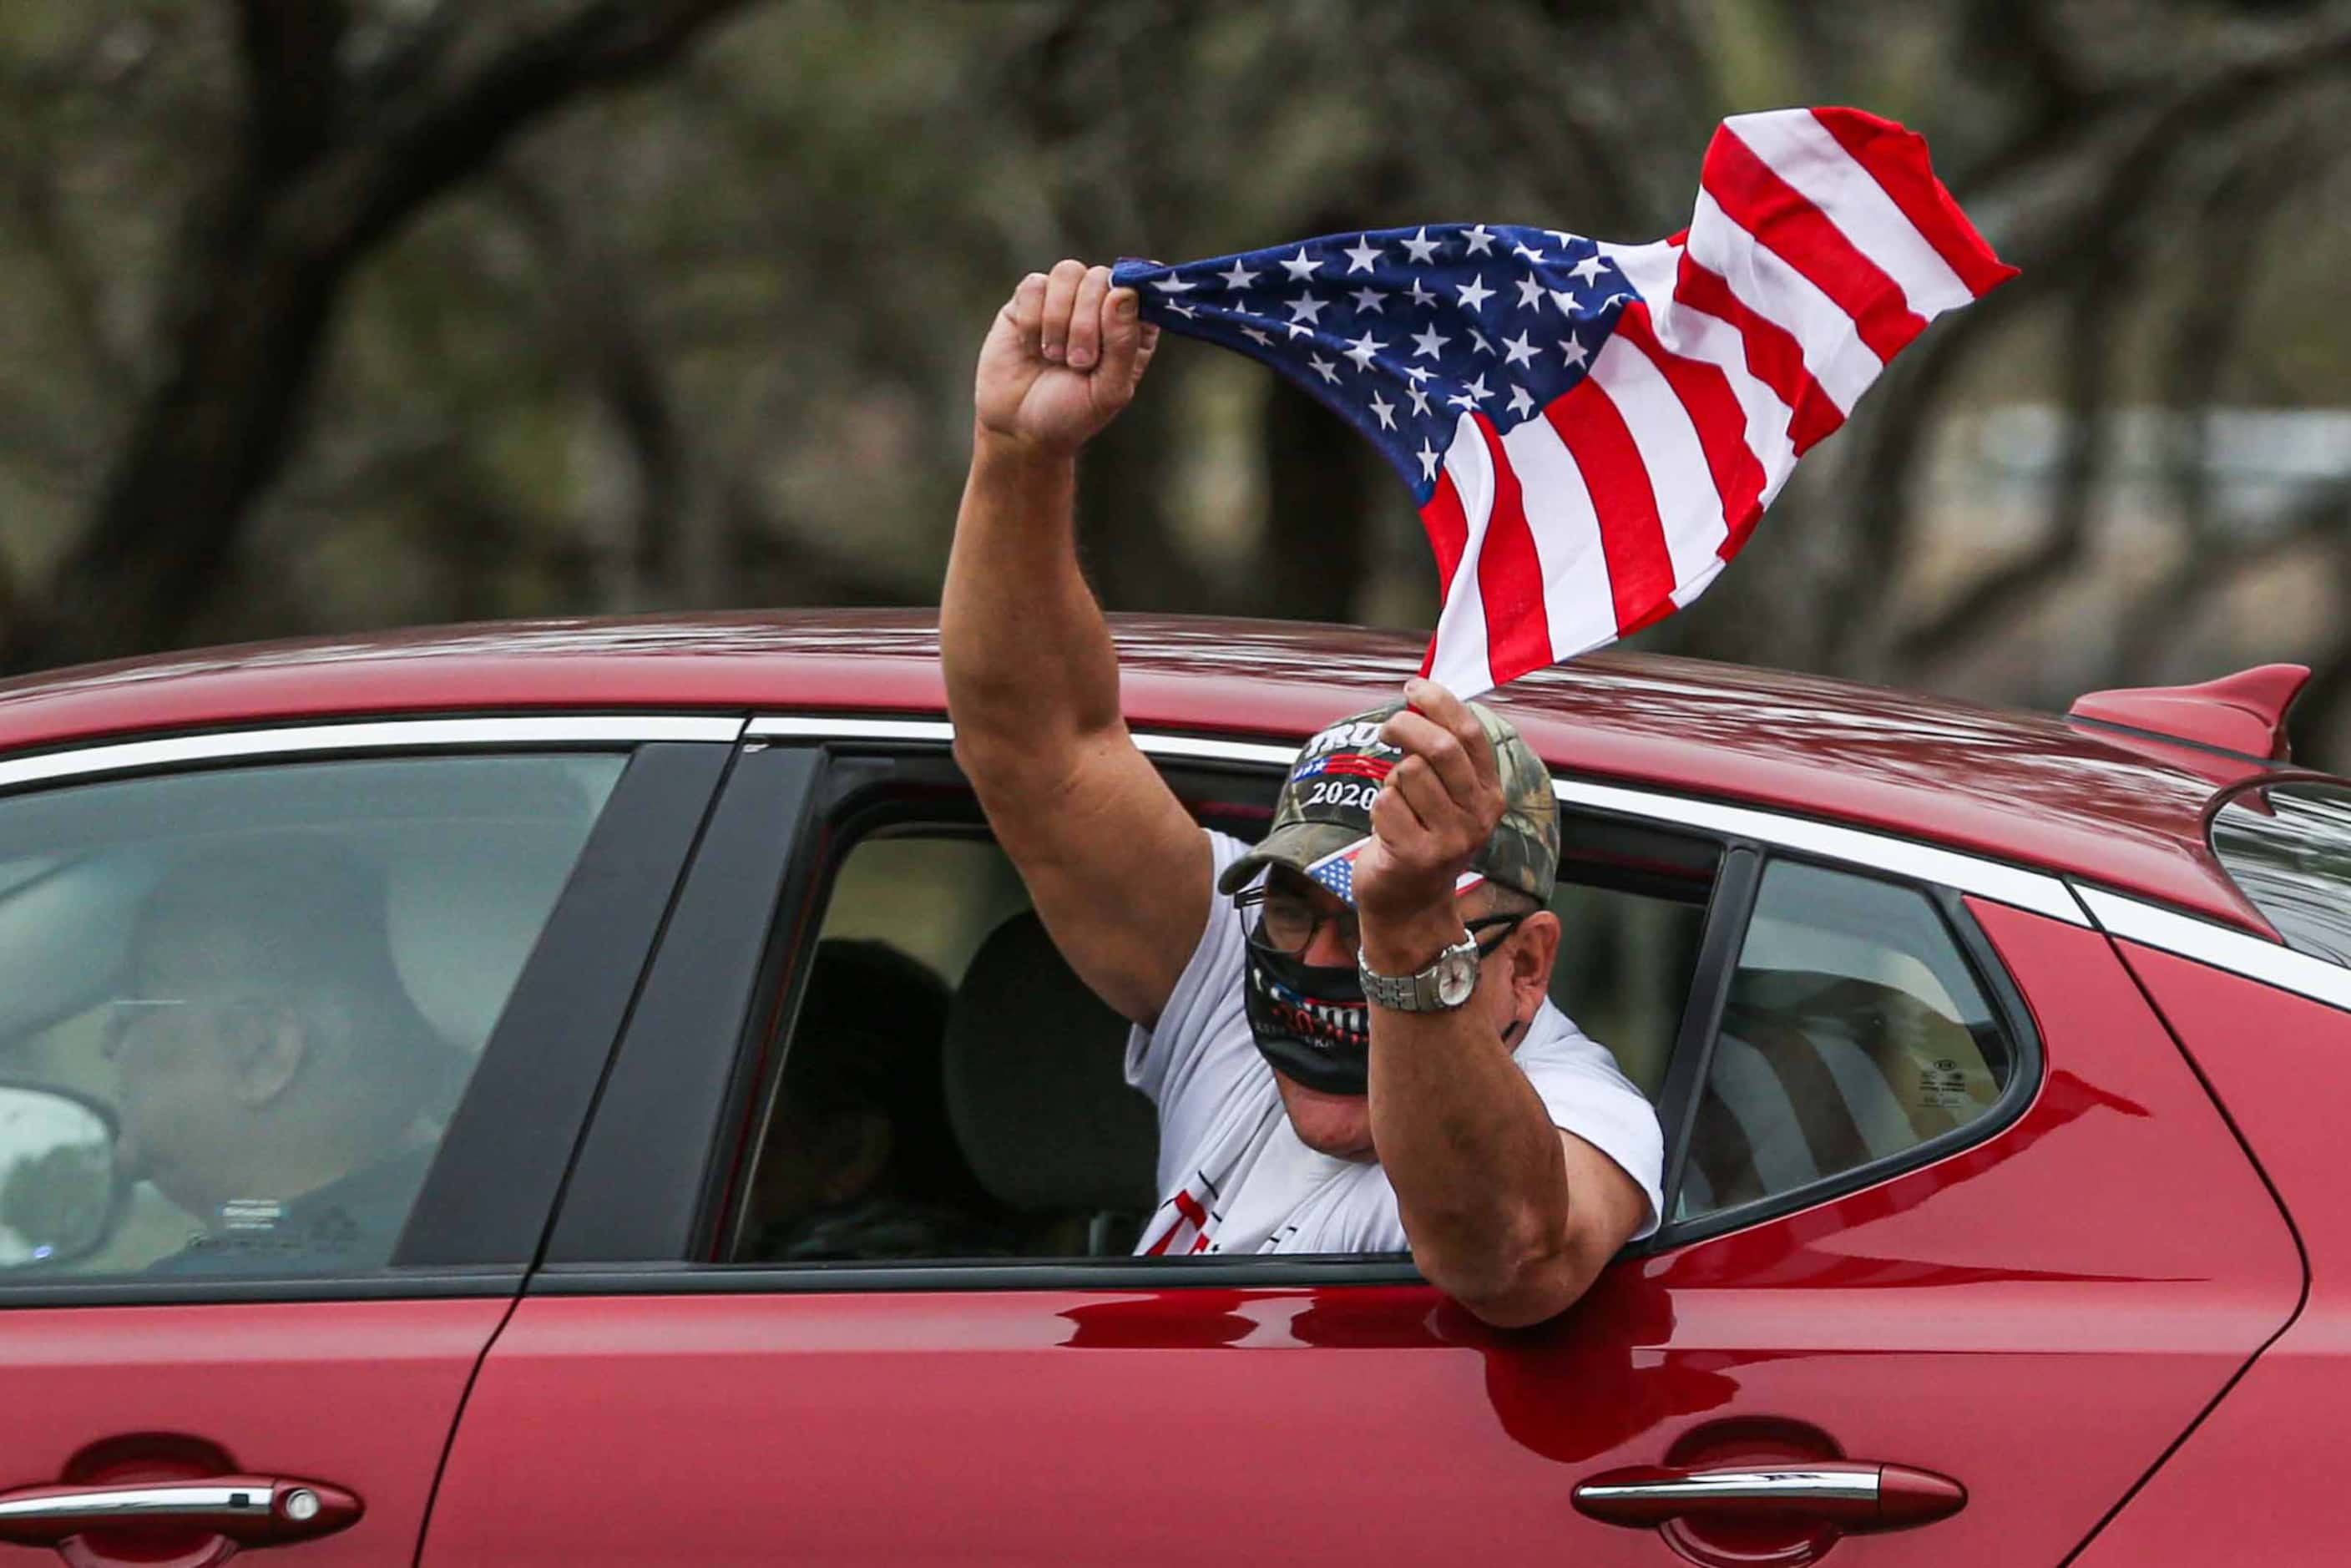 A man shouts from a car window in motion holding an American flag as he passes in front of a...